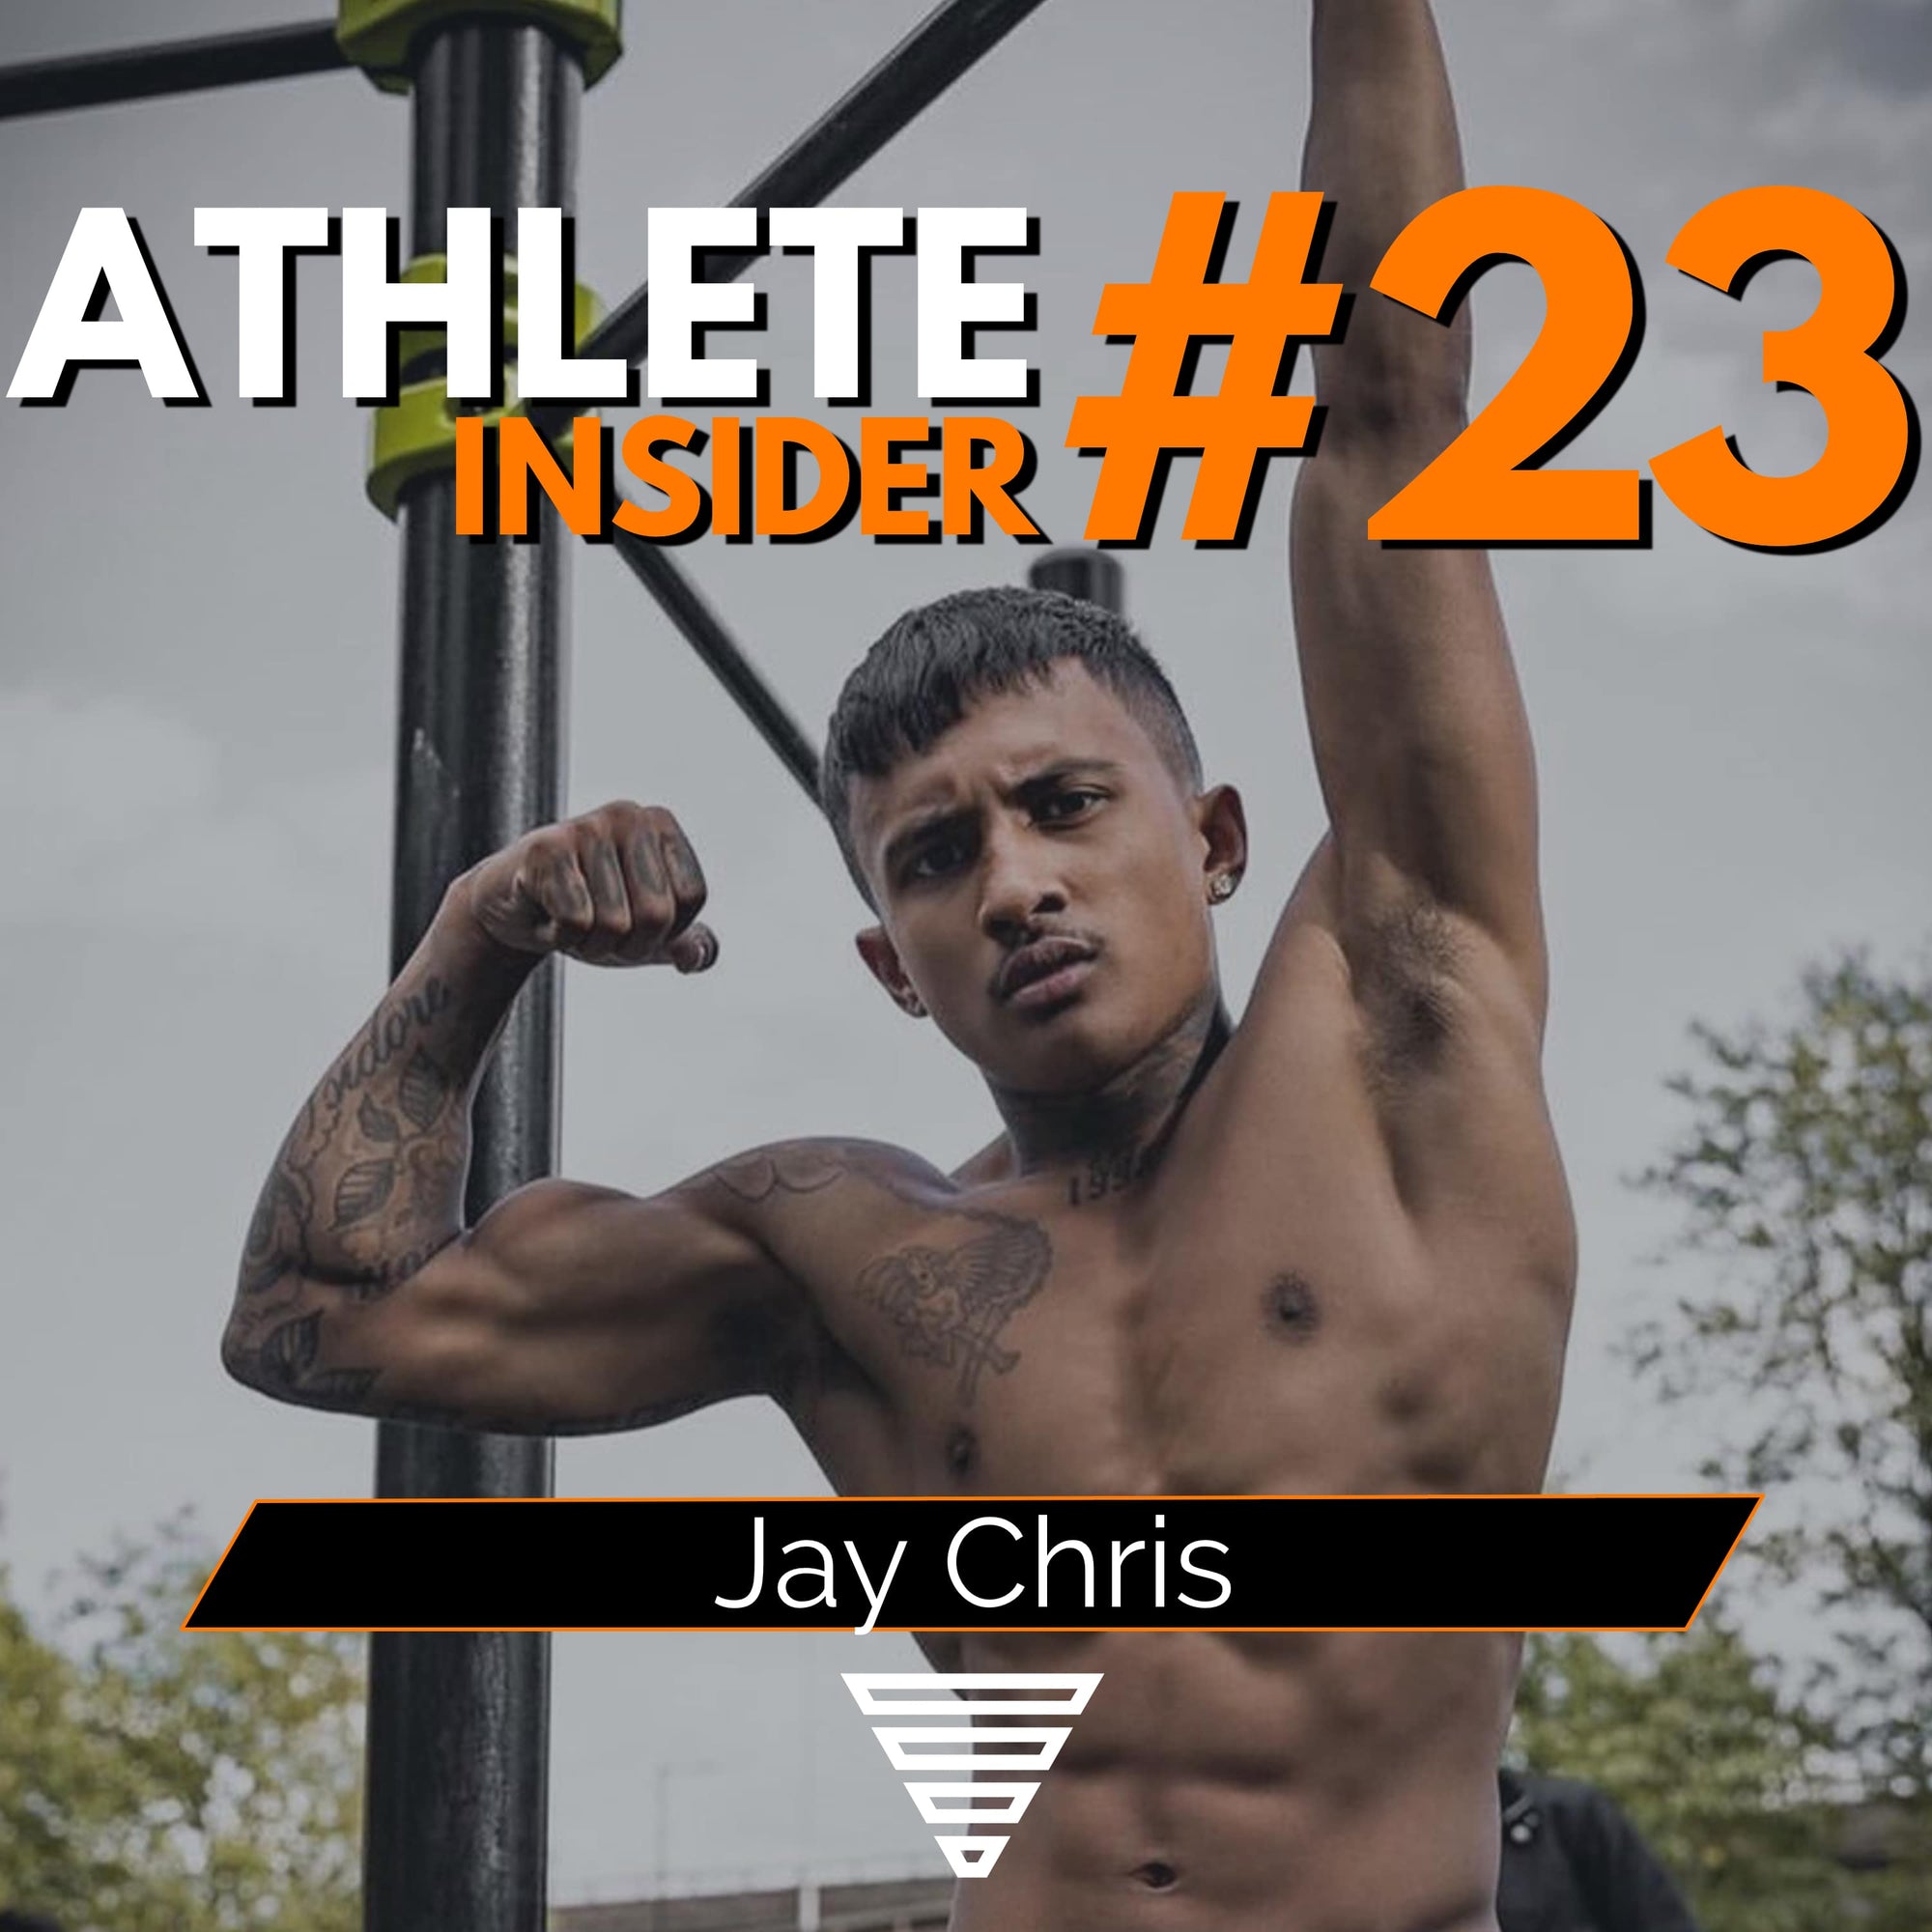 JAY CHRIS | What you didn't know about him | Interview | The Athlete Insider Podcast #23